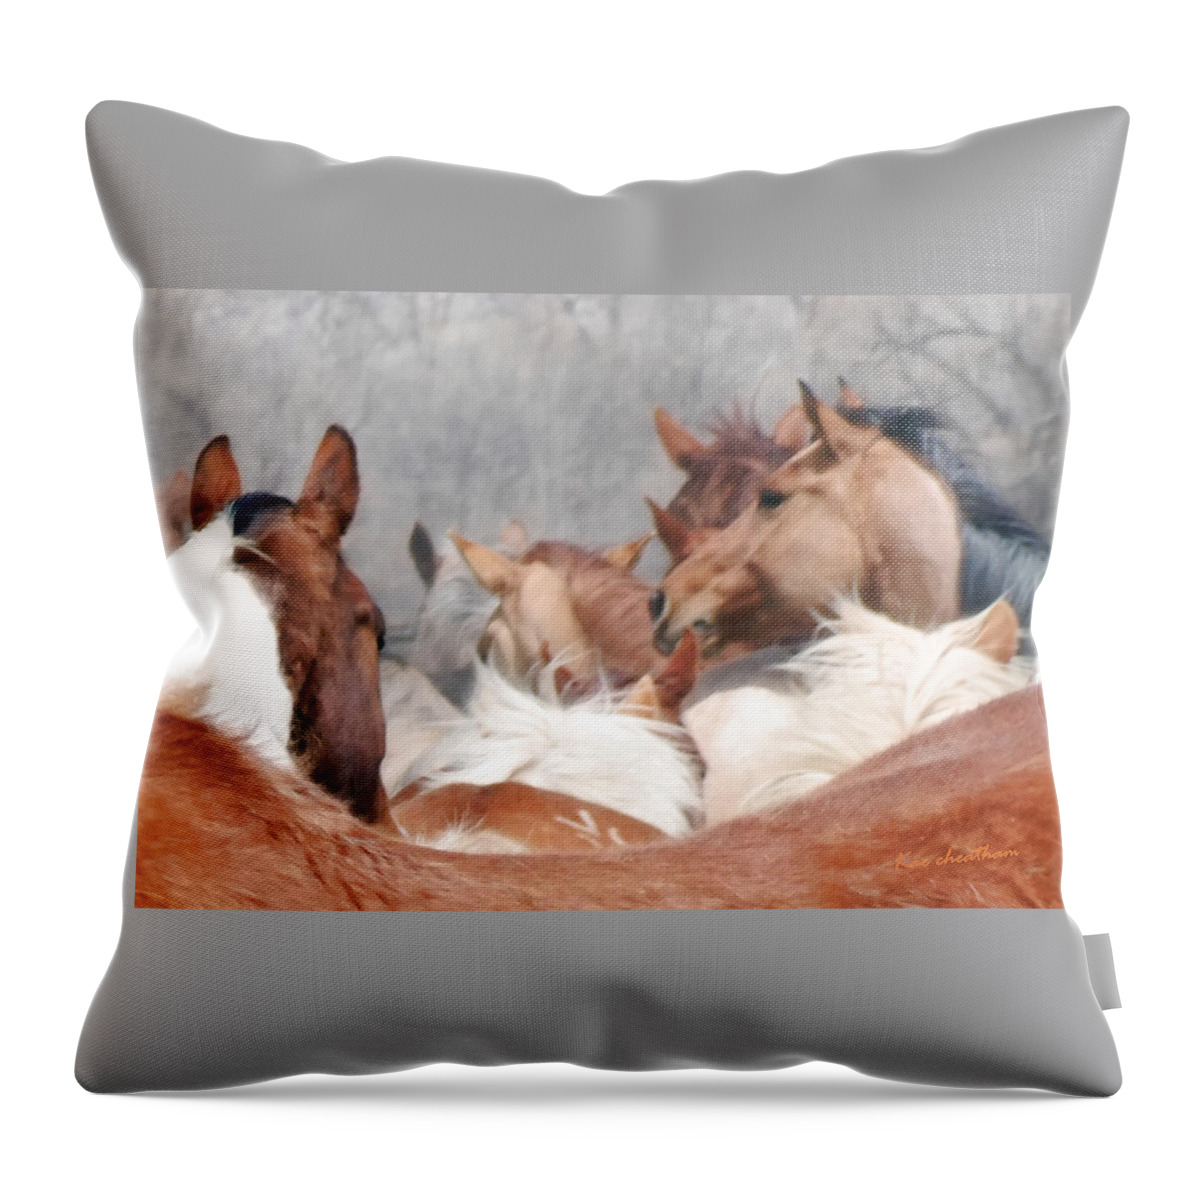 Horses Throw Pillow featuring the photograph Delicate Illusion by Kae Cheatham